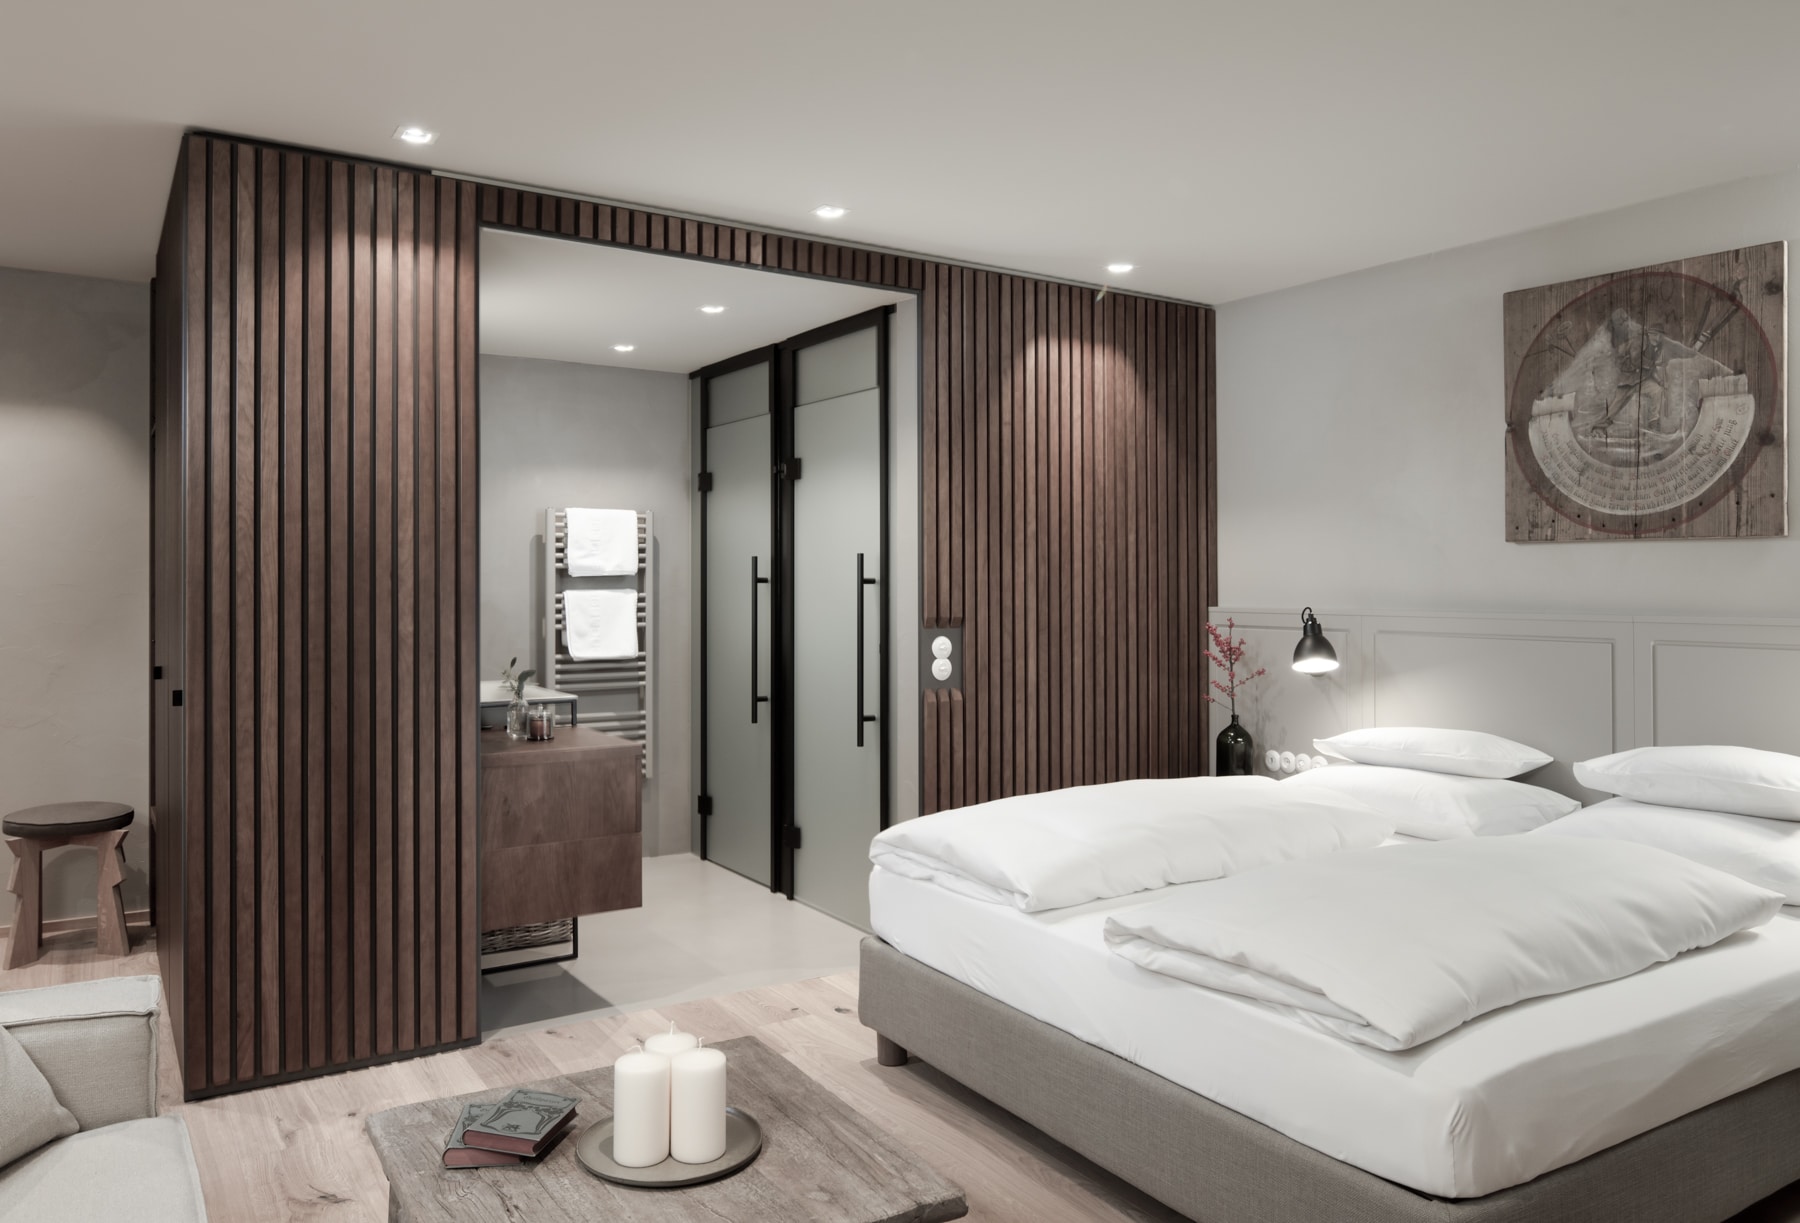 Elegant modern bedroom with a sleek design featuring a comfortable bed, sliding wooden panels leading to an en-suite bathroom, and harmonious neutral tones for a relaxing atmosphere.